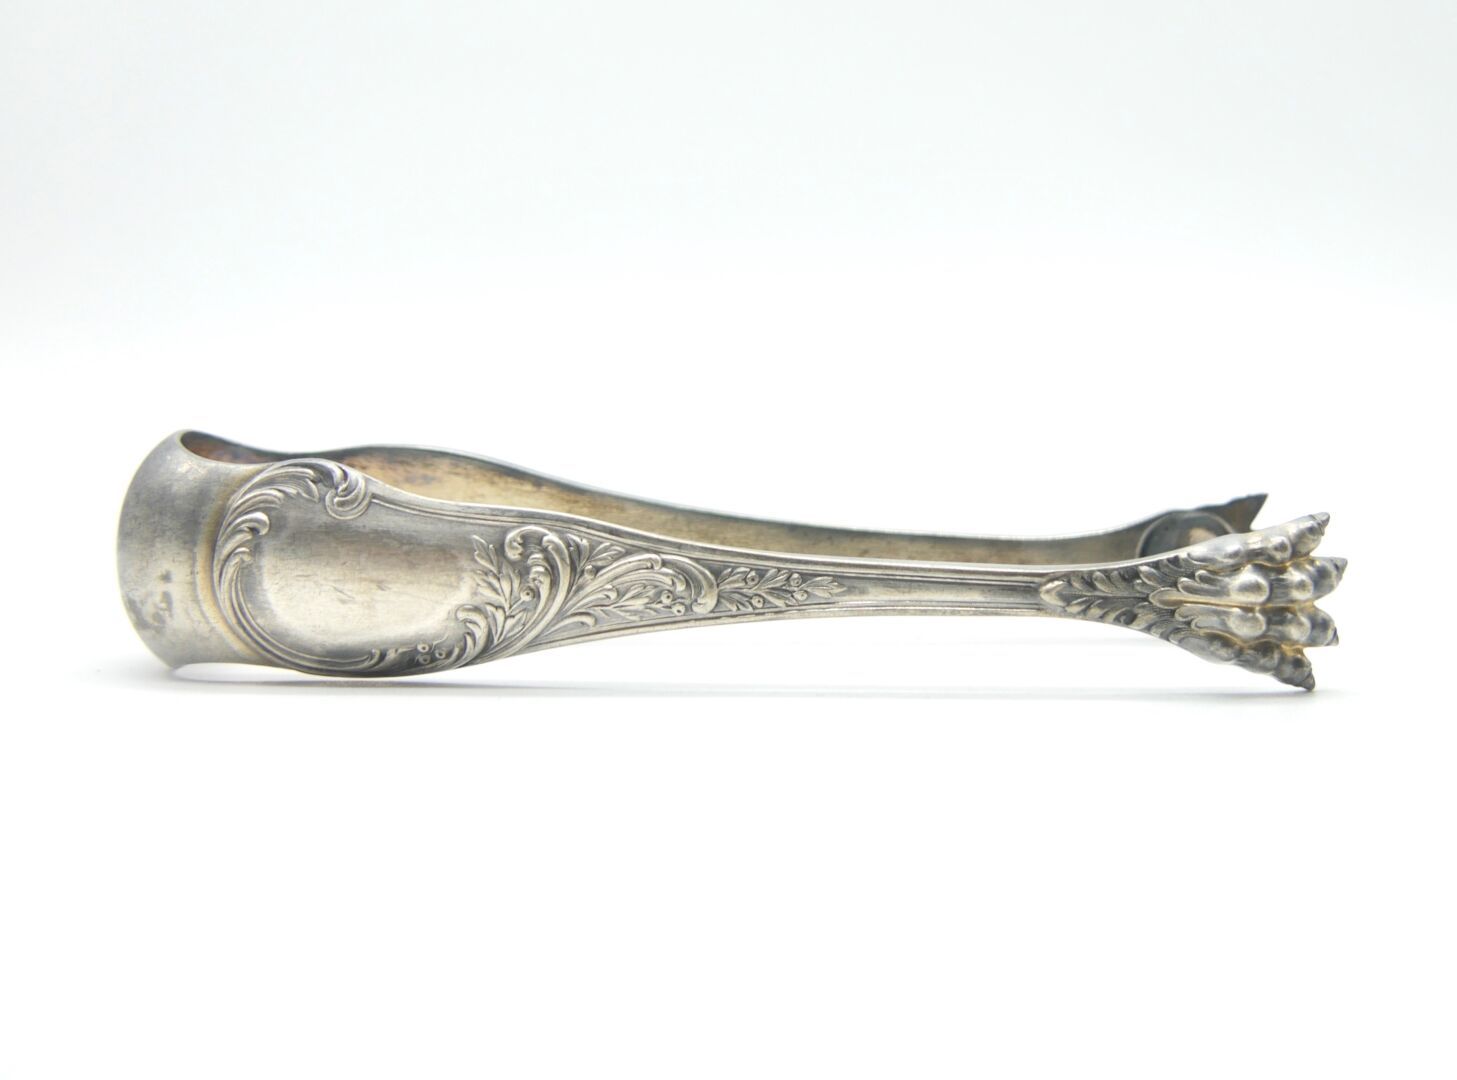 Null XIXth CENTURY

Sugar tongs in silver 950/1000e, decorated with foliage, the&hellip;